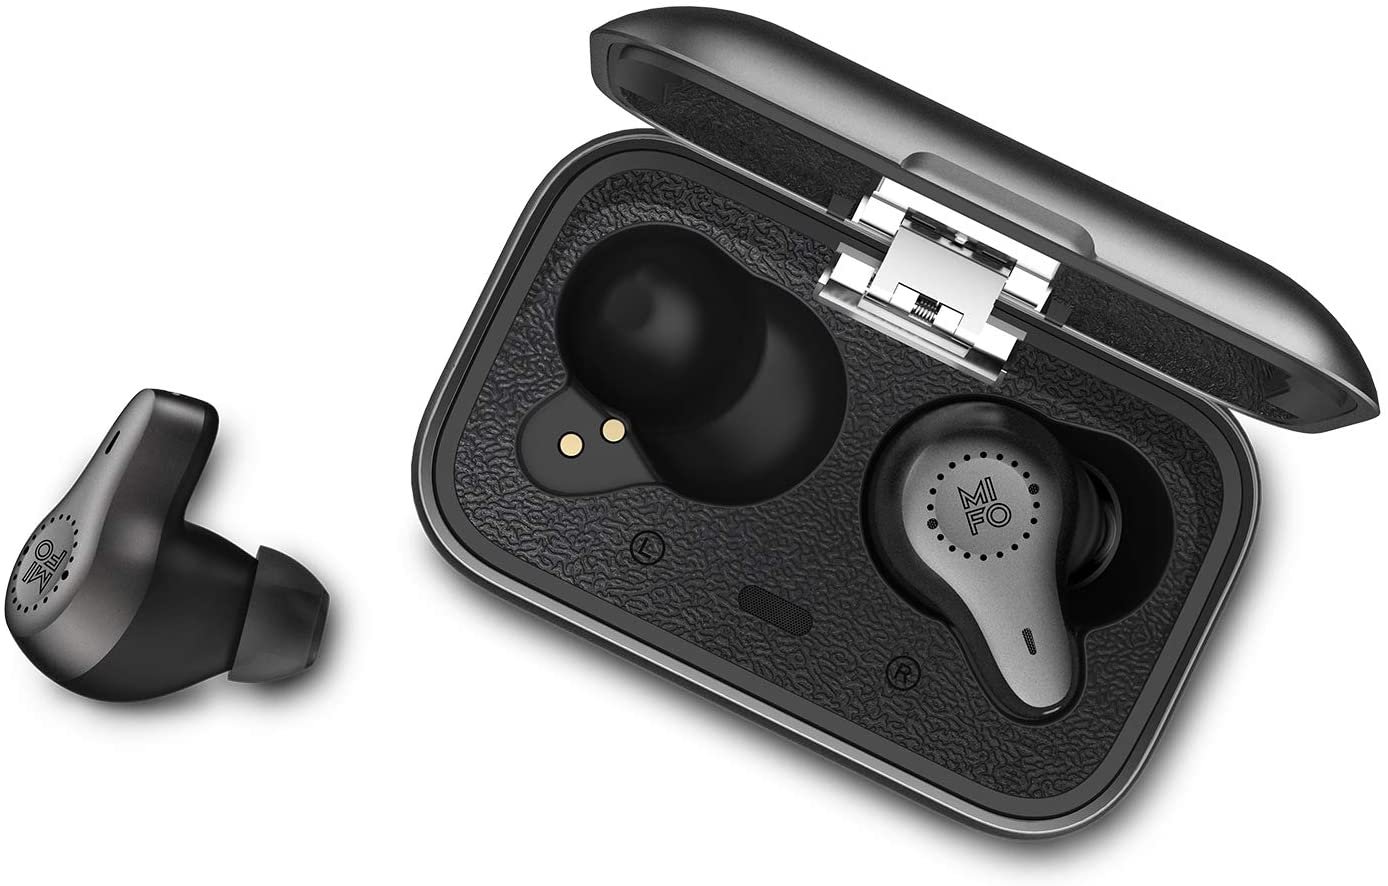 Mifo O7 Dynamic [2022 Black] Smart Touch True Wireless Bluetooth 5.0 Earbuds - Free Lagos Shipping